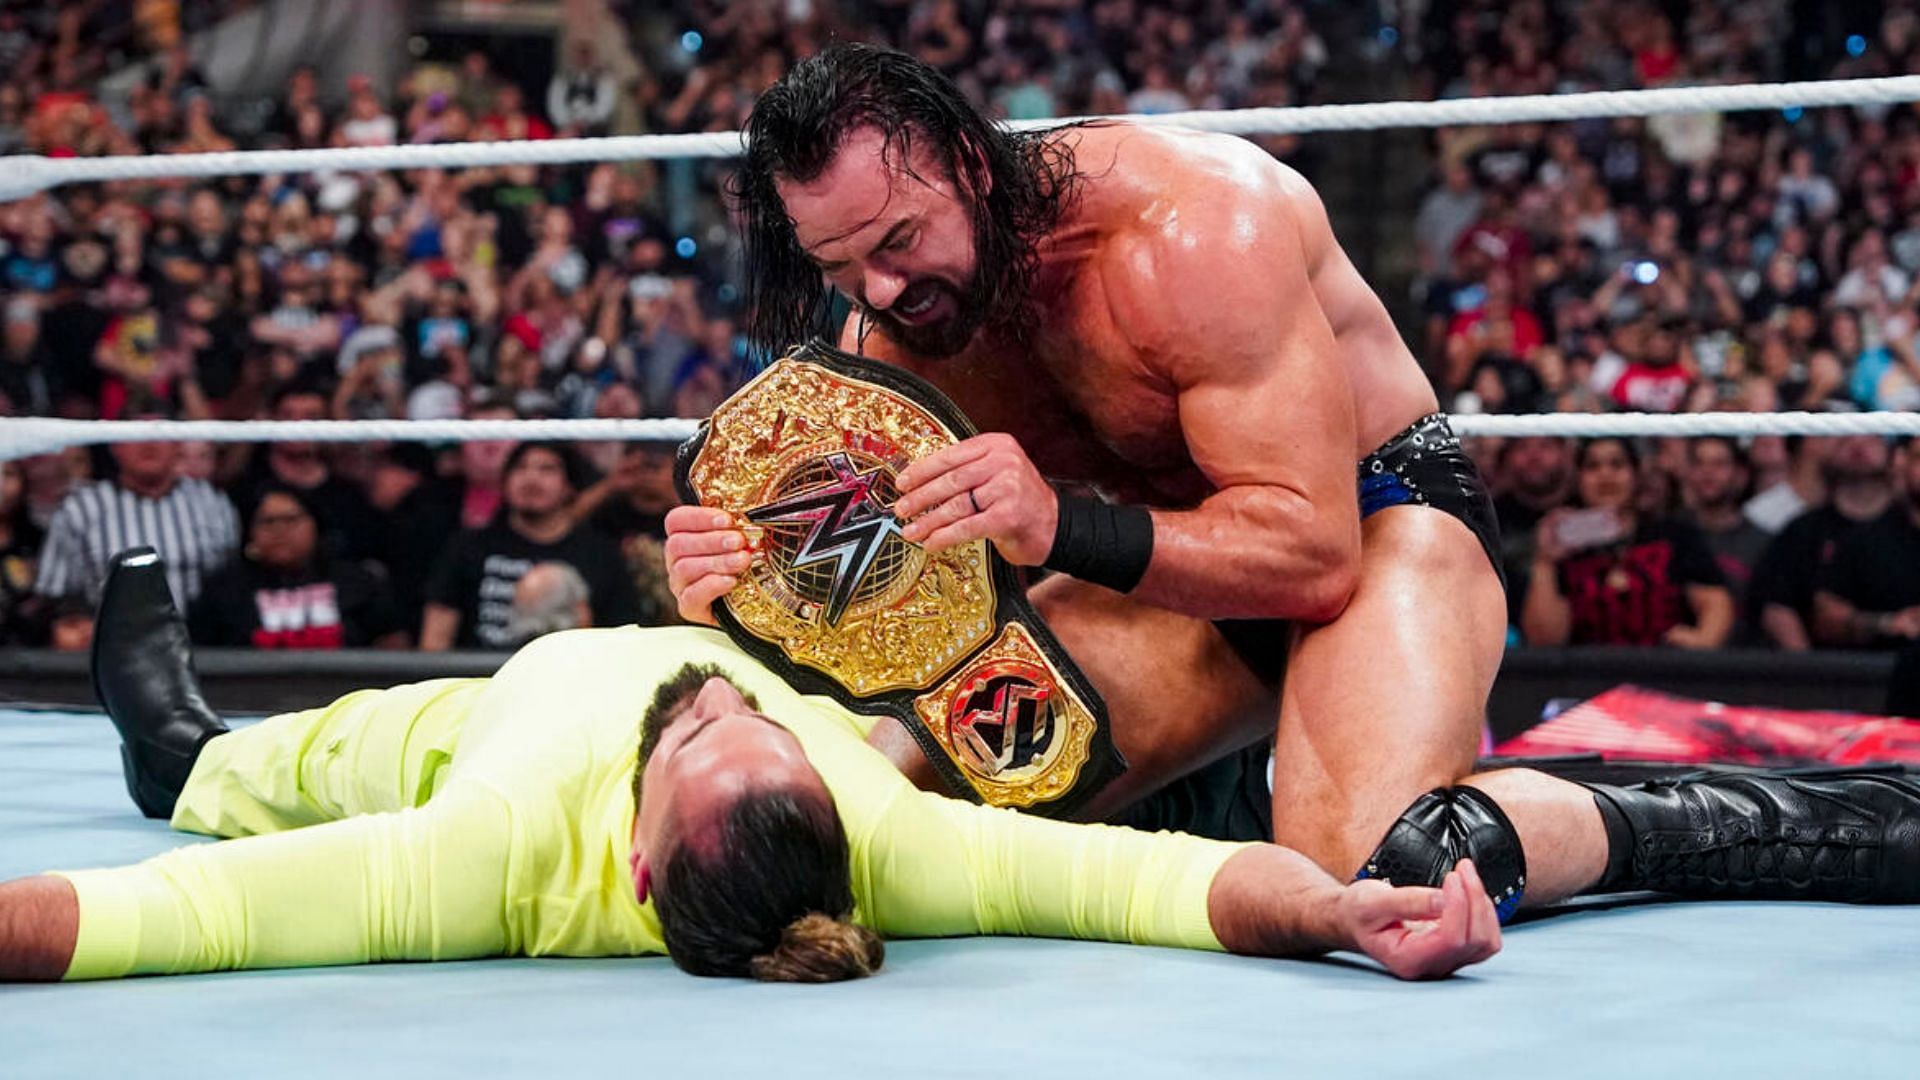 Drew McIntyre is also feuding with Seth Rollins